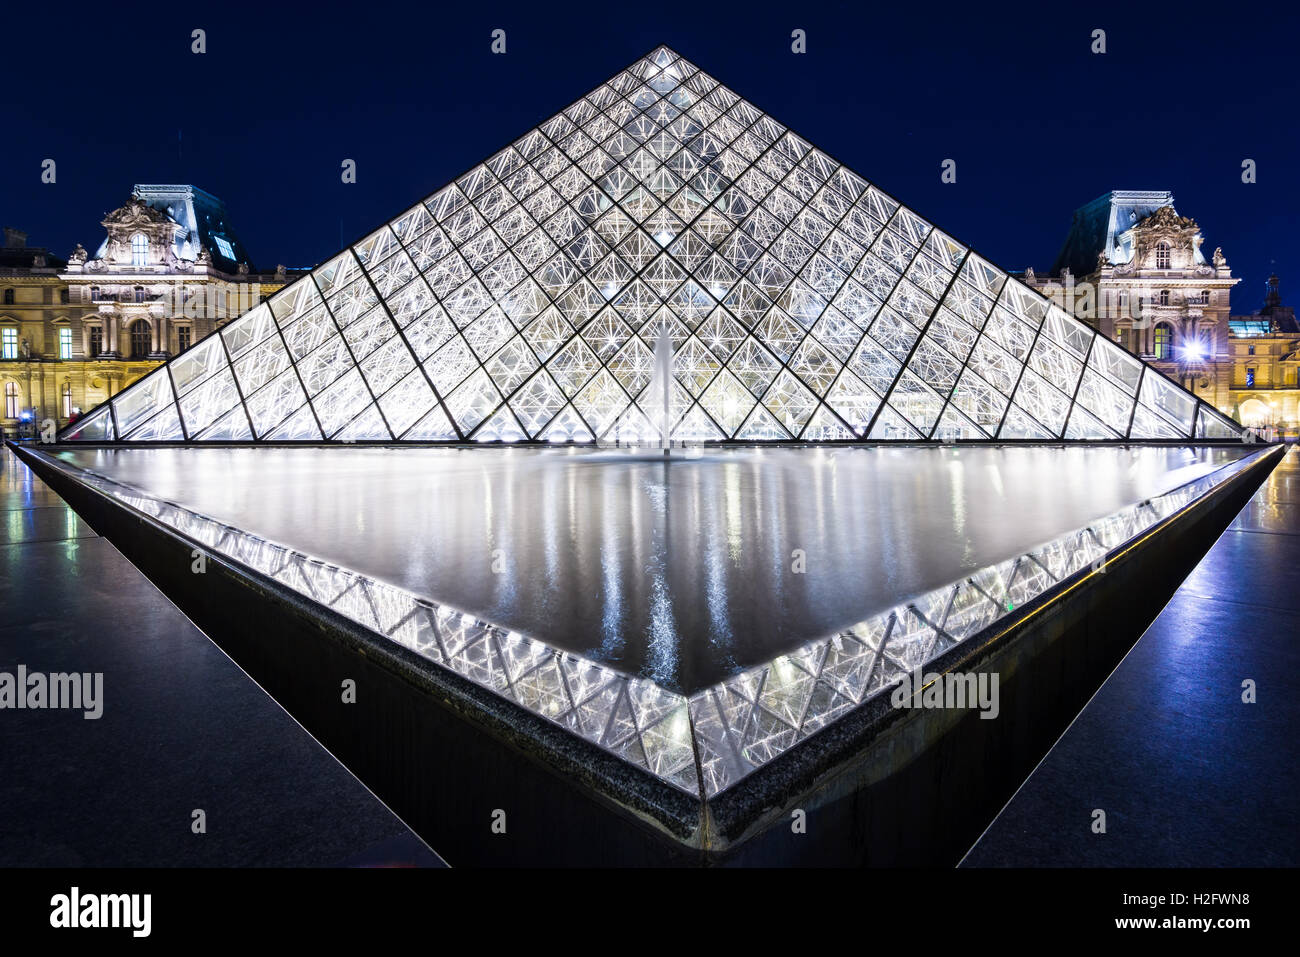 long exposure image of the Louvre Pyramid (Pyramide du Louvre) at night. The Pyramid was designed by I.M Pei Stock Photo